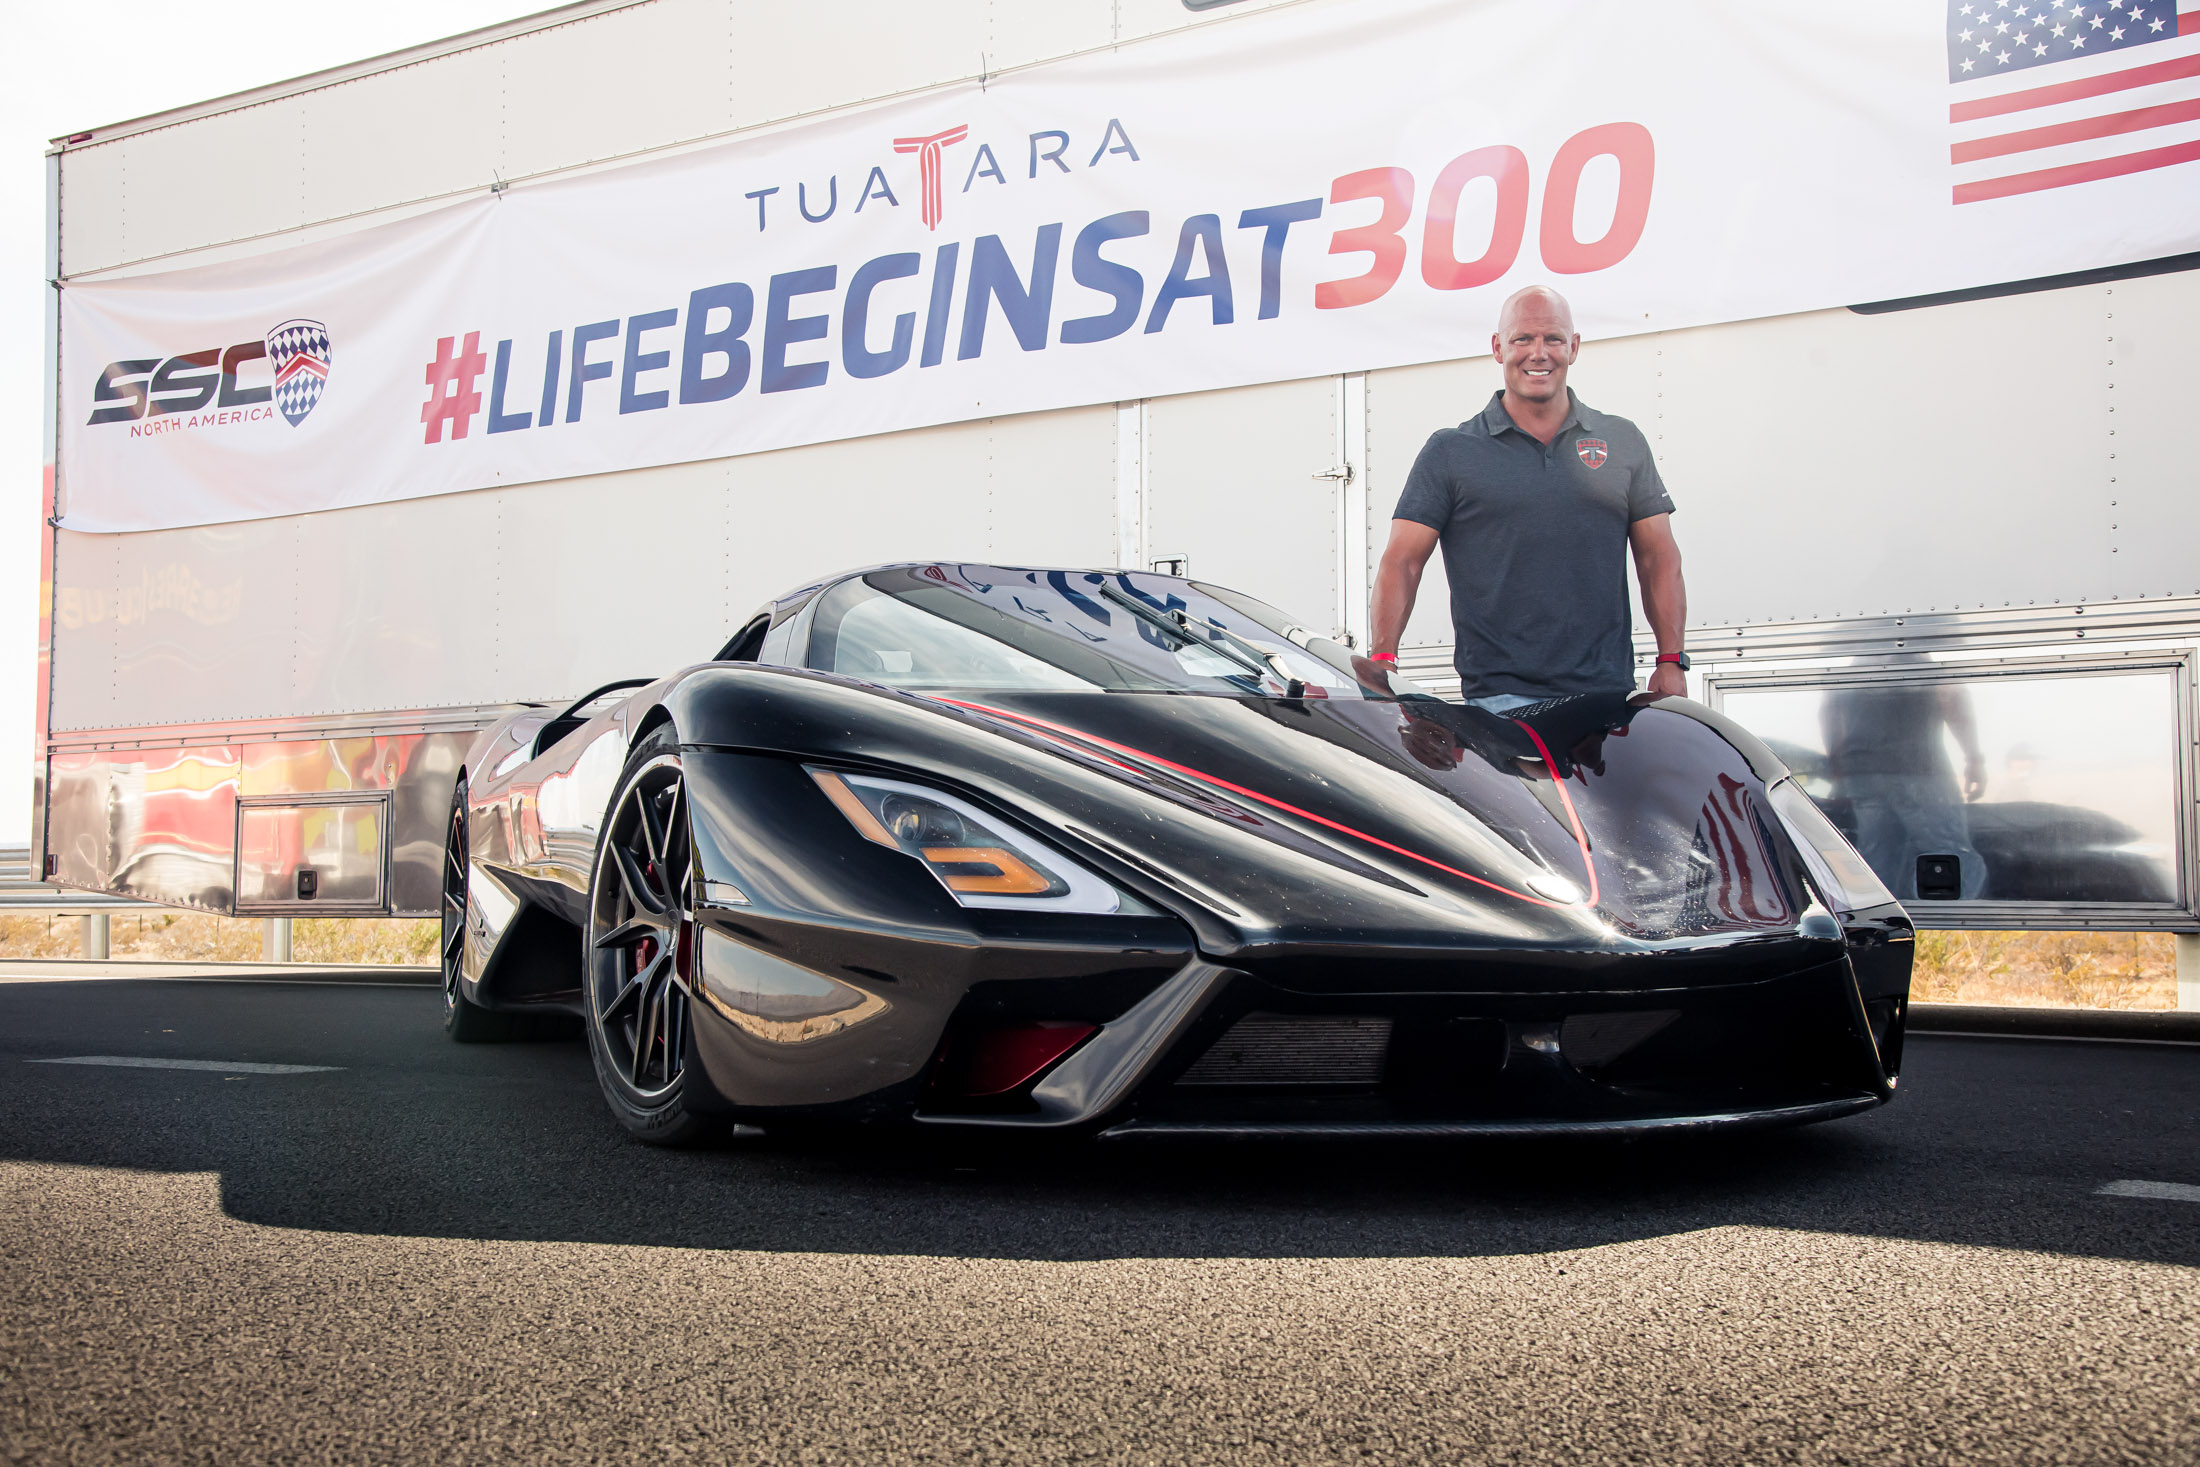 SSC Tuatara Is World's Fastest Production Car: New Top Speed